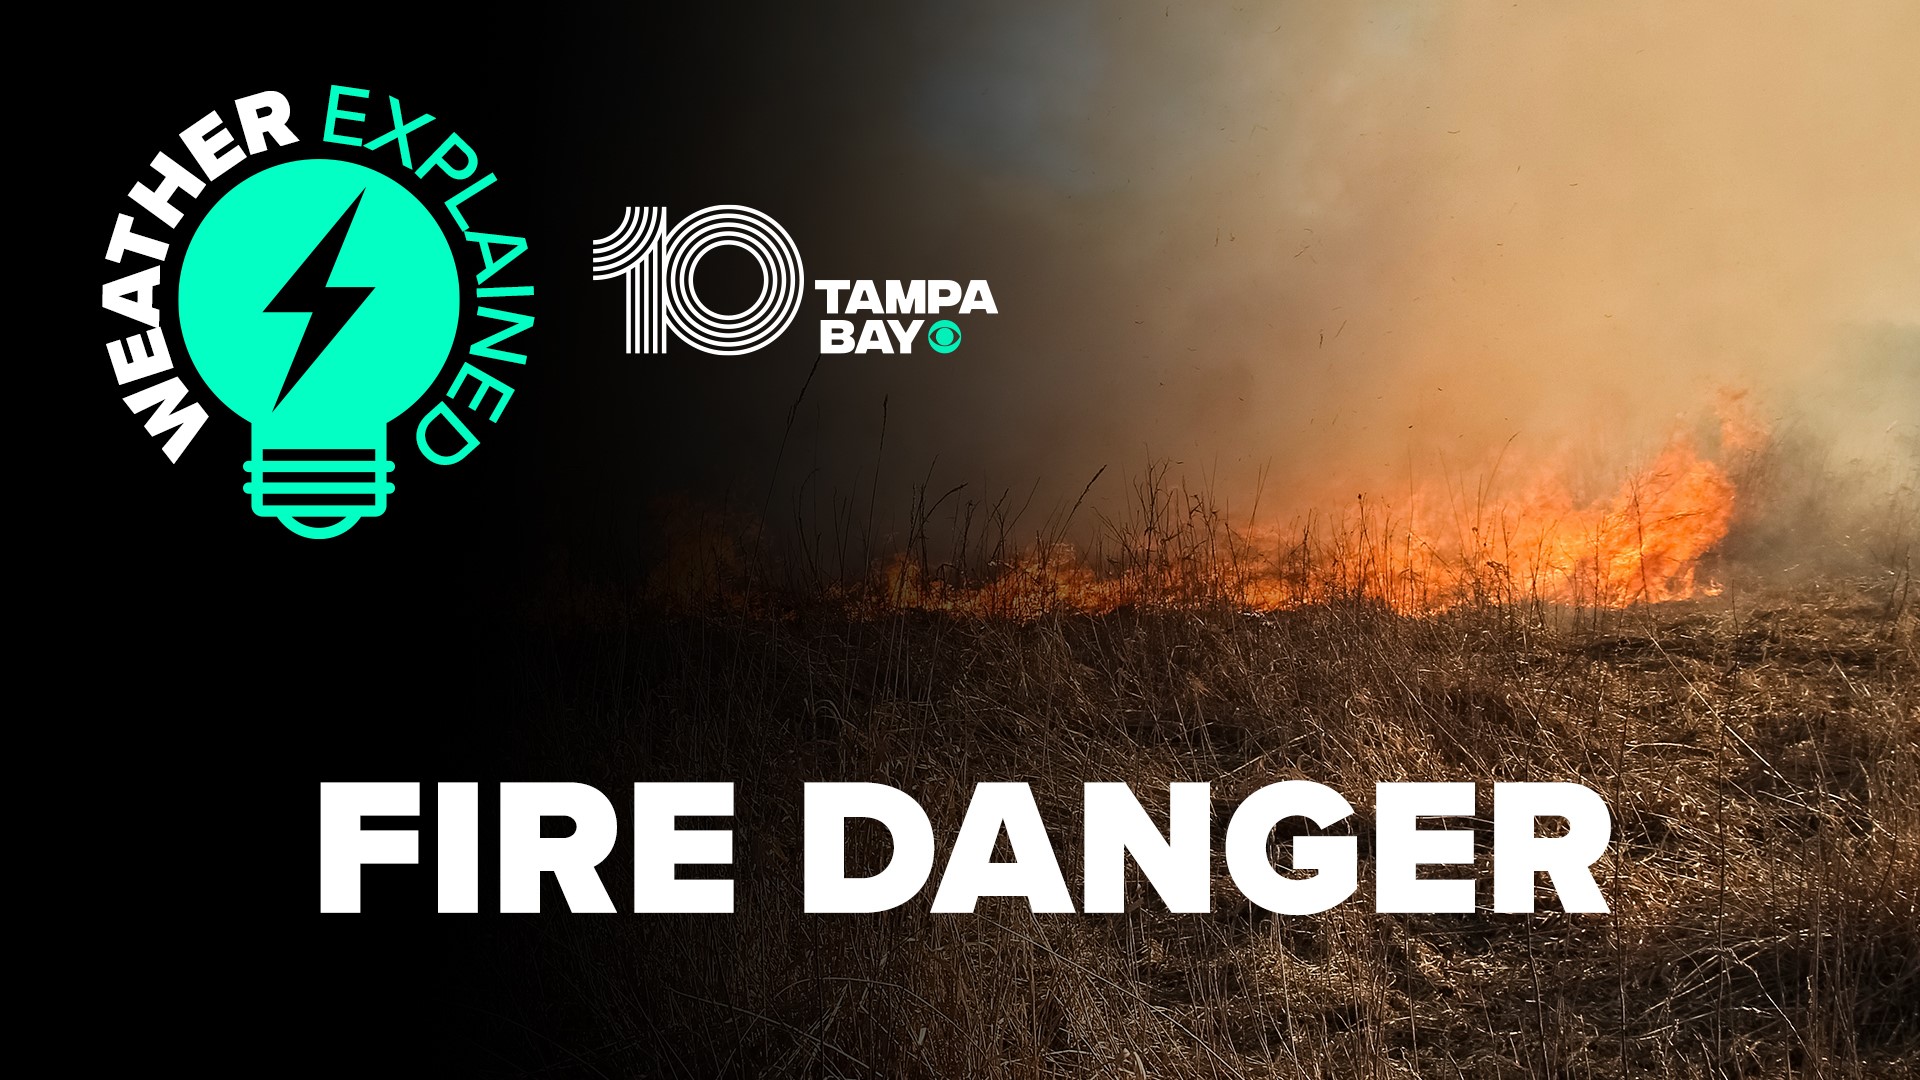 10 Tampa Bay chief meteorologist Bobby Deskins details the necessary weather conditions that allow wildfires to burn out of control.